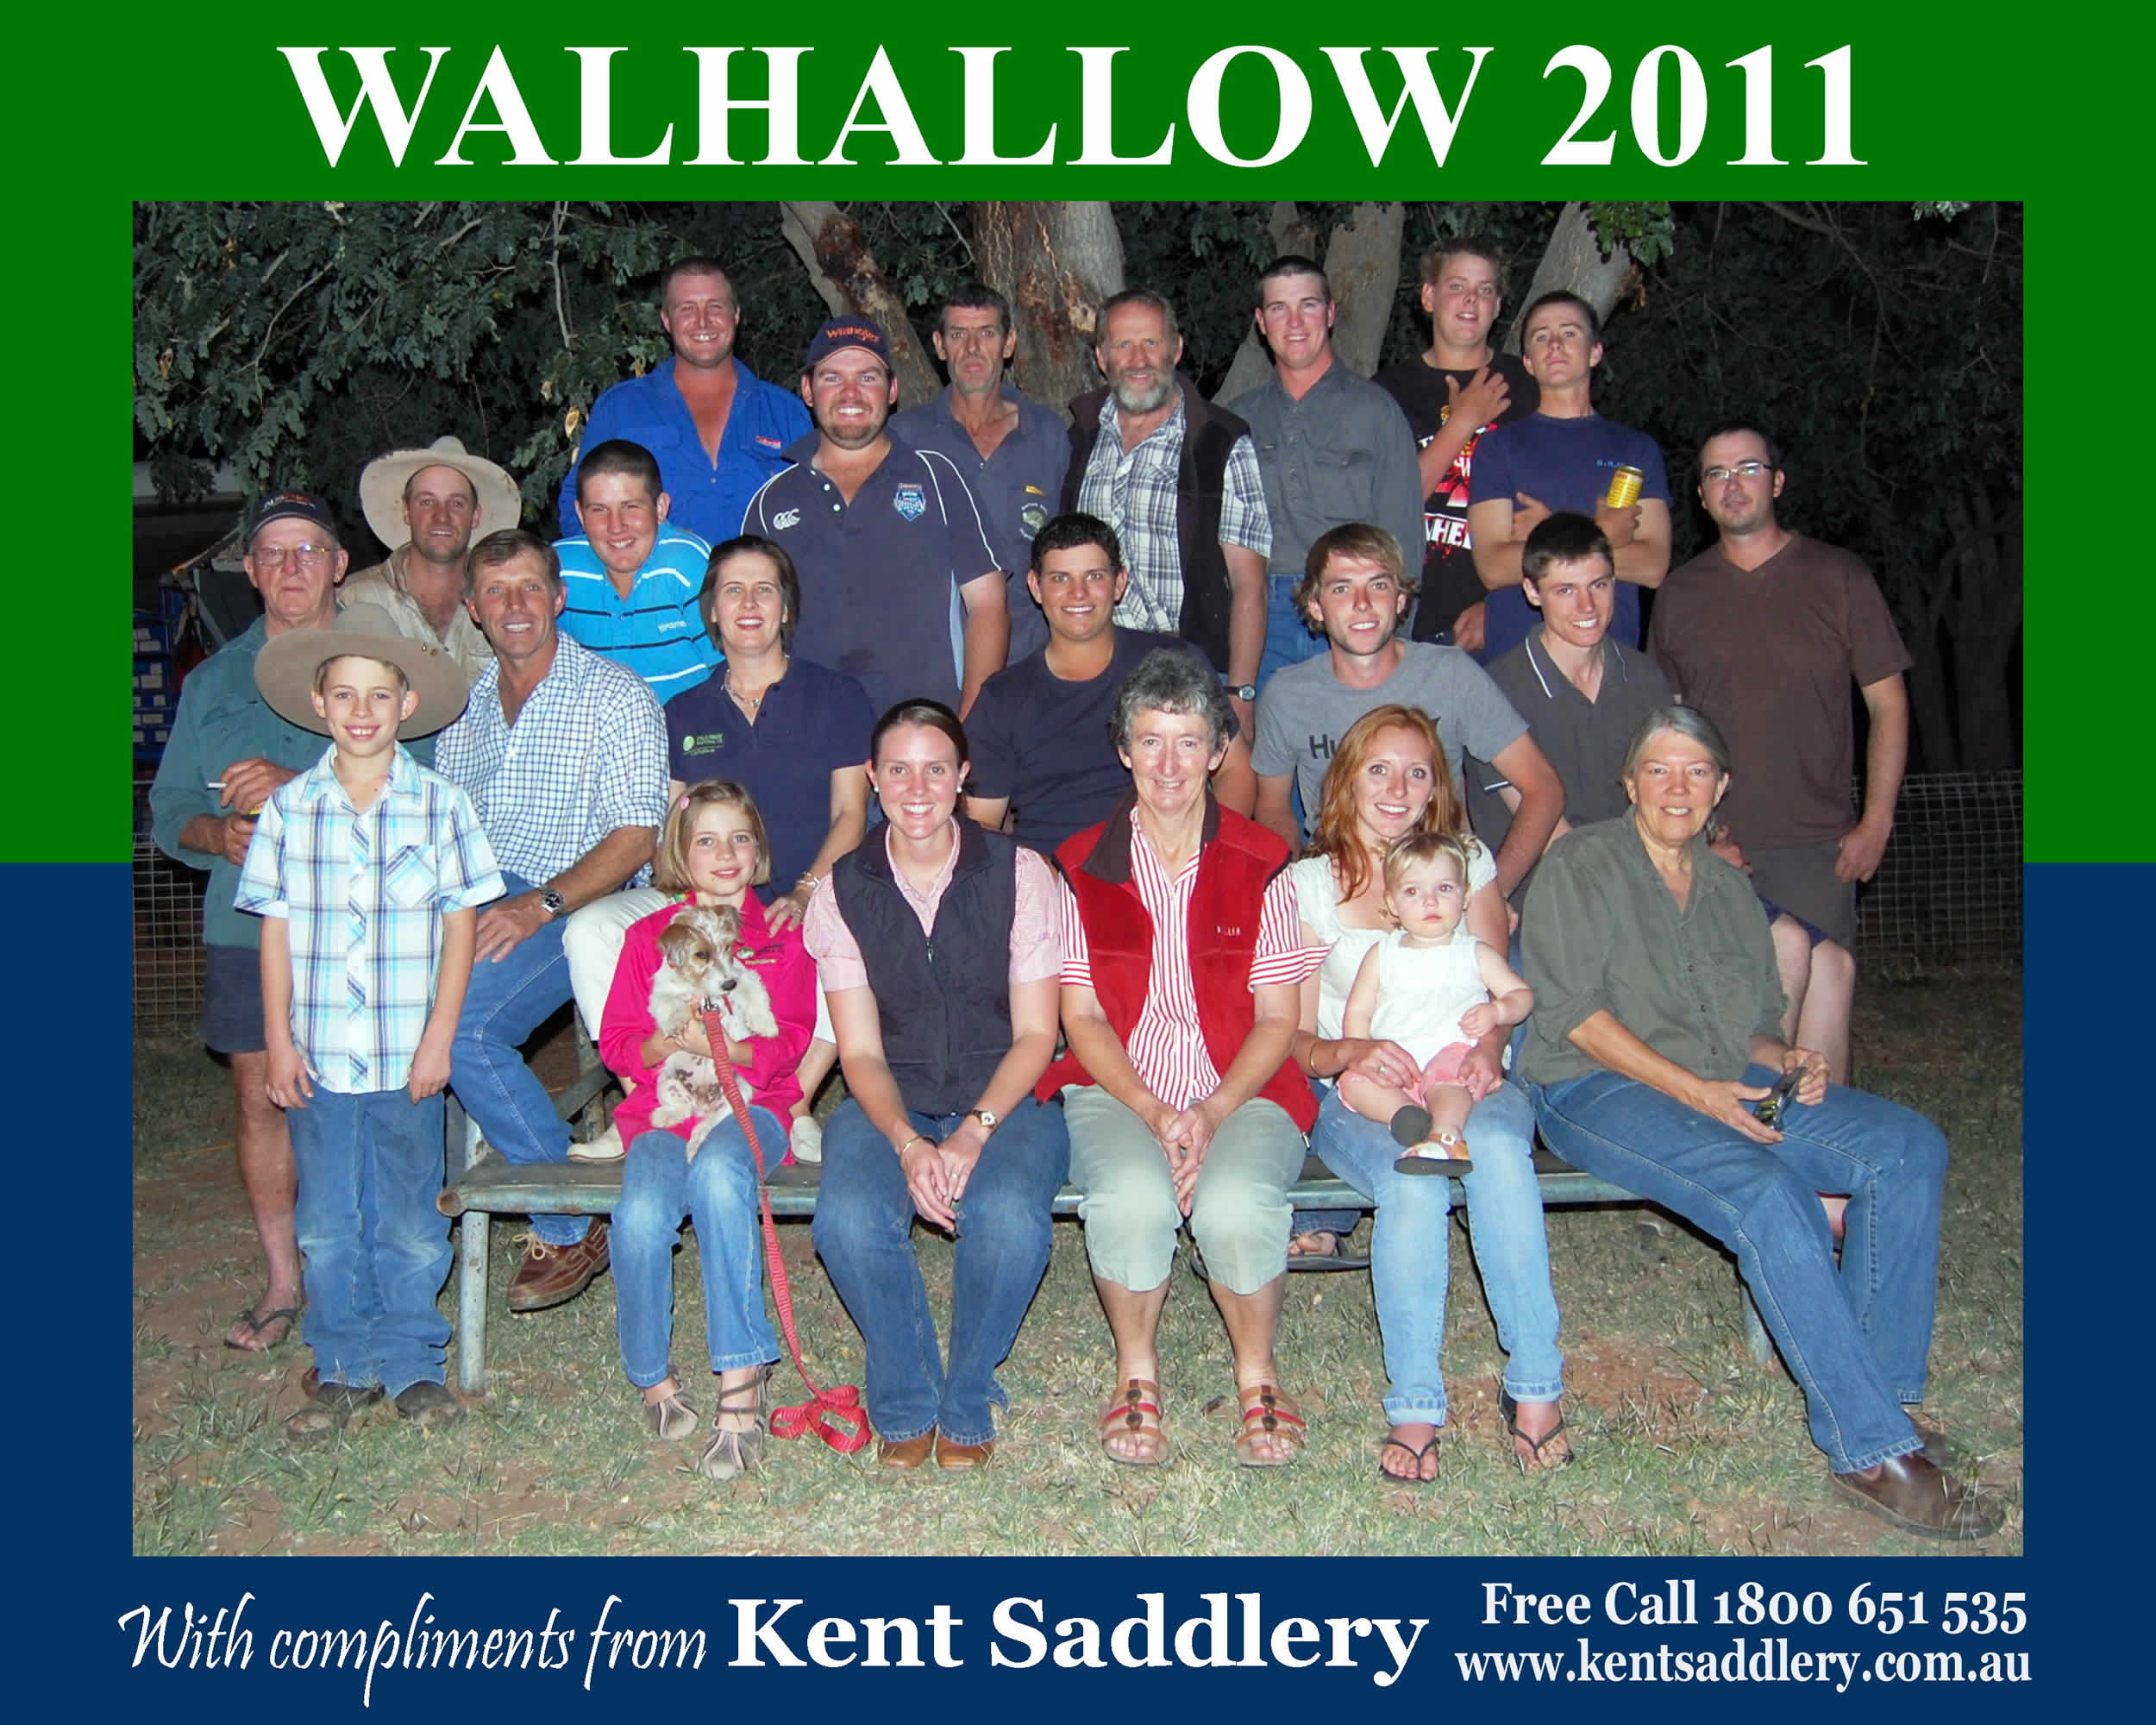 Northern Territory - Walhallow 31